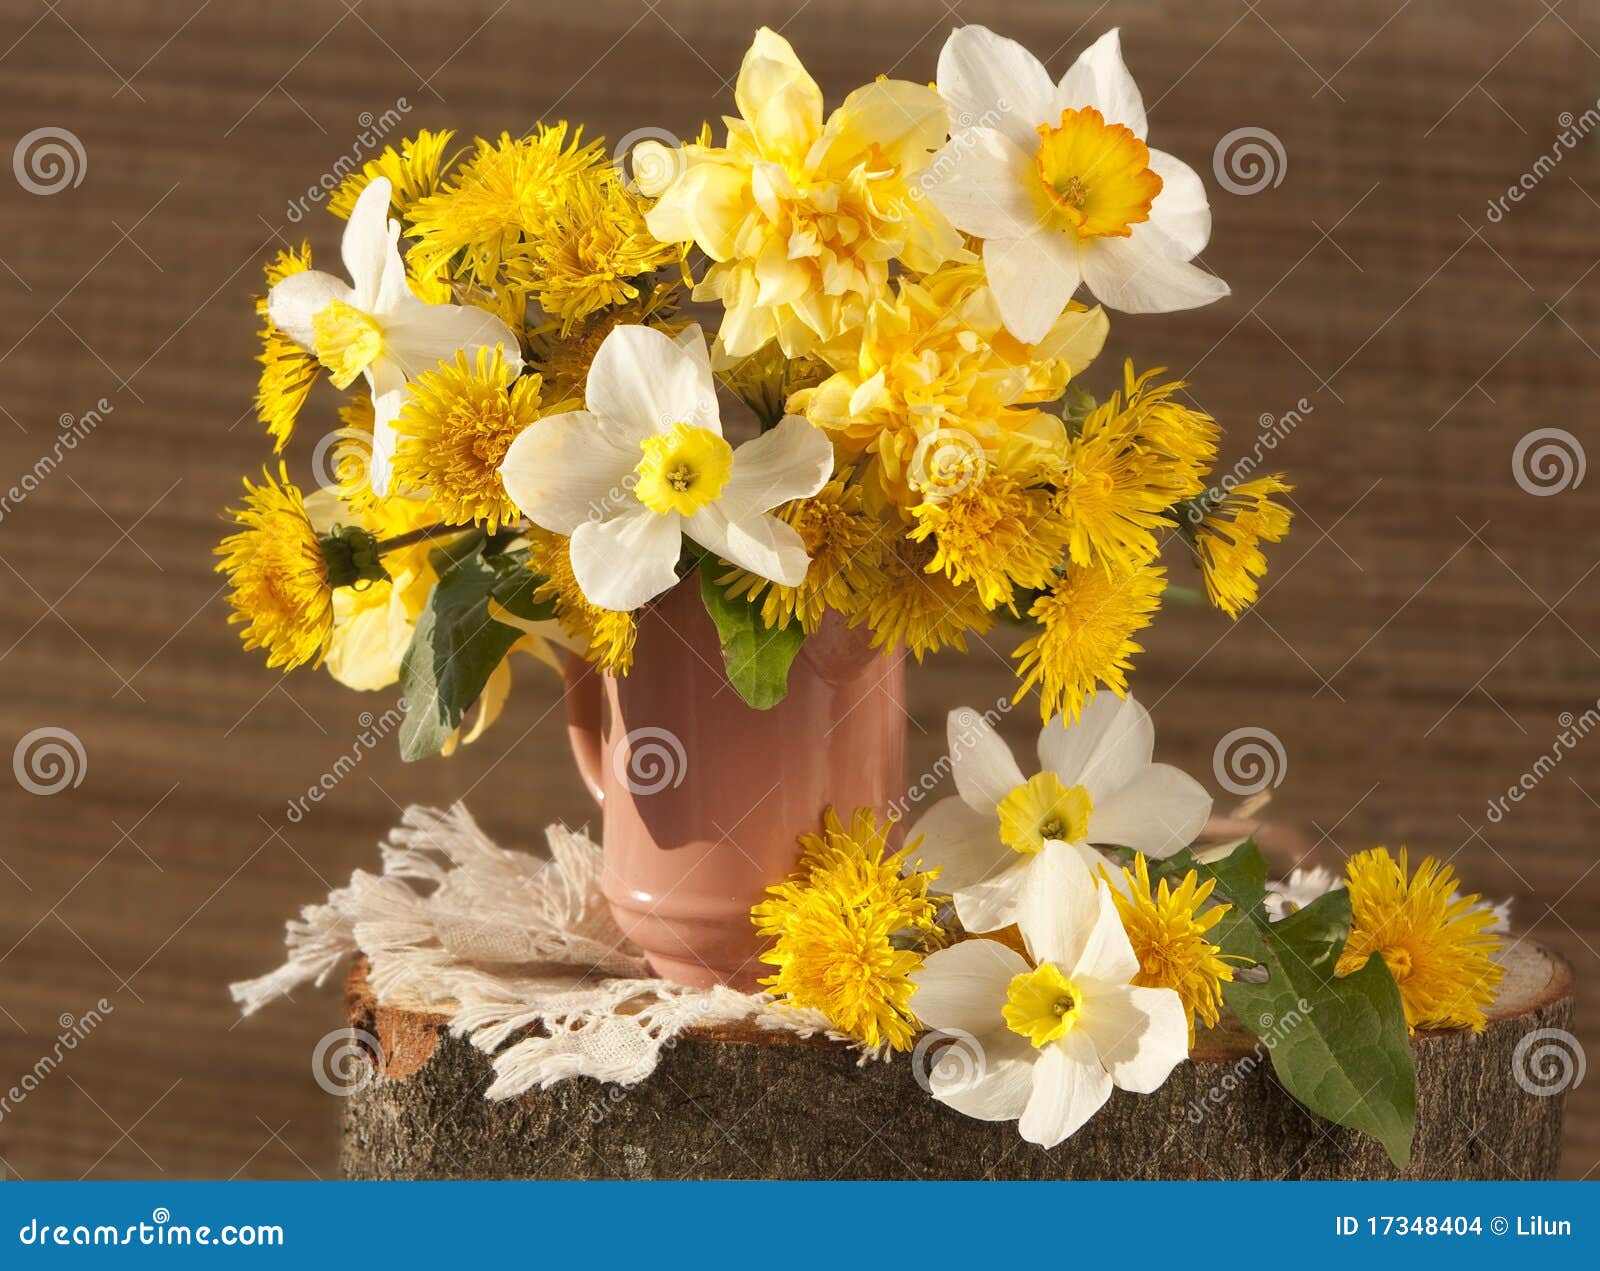 Bouquet Of Flowers Narcissus Stock Images  Image: 17348404